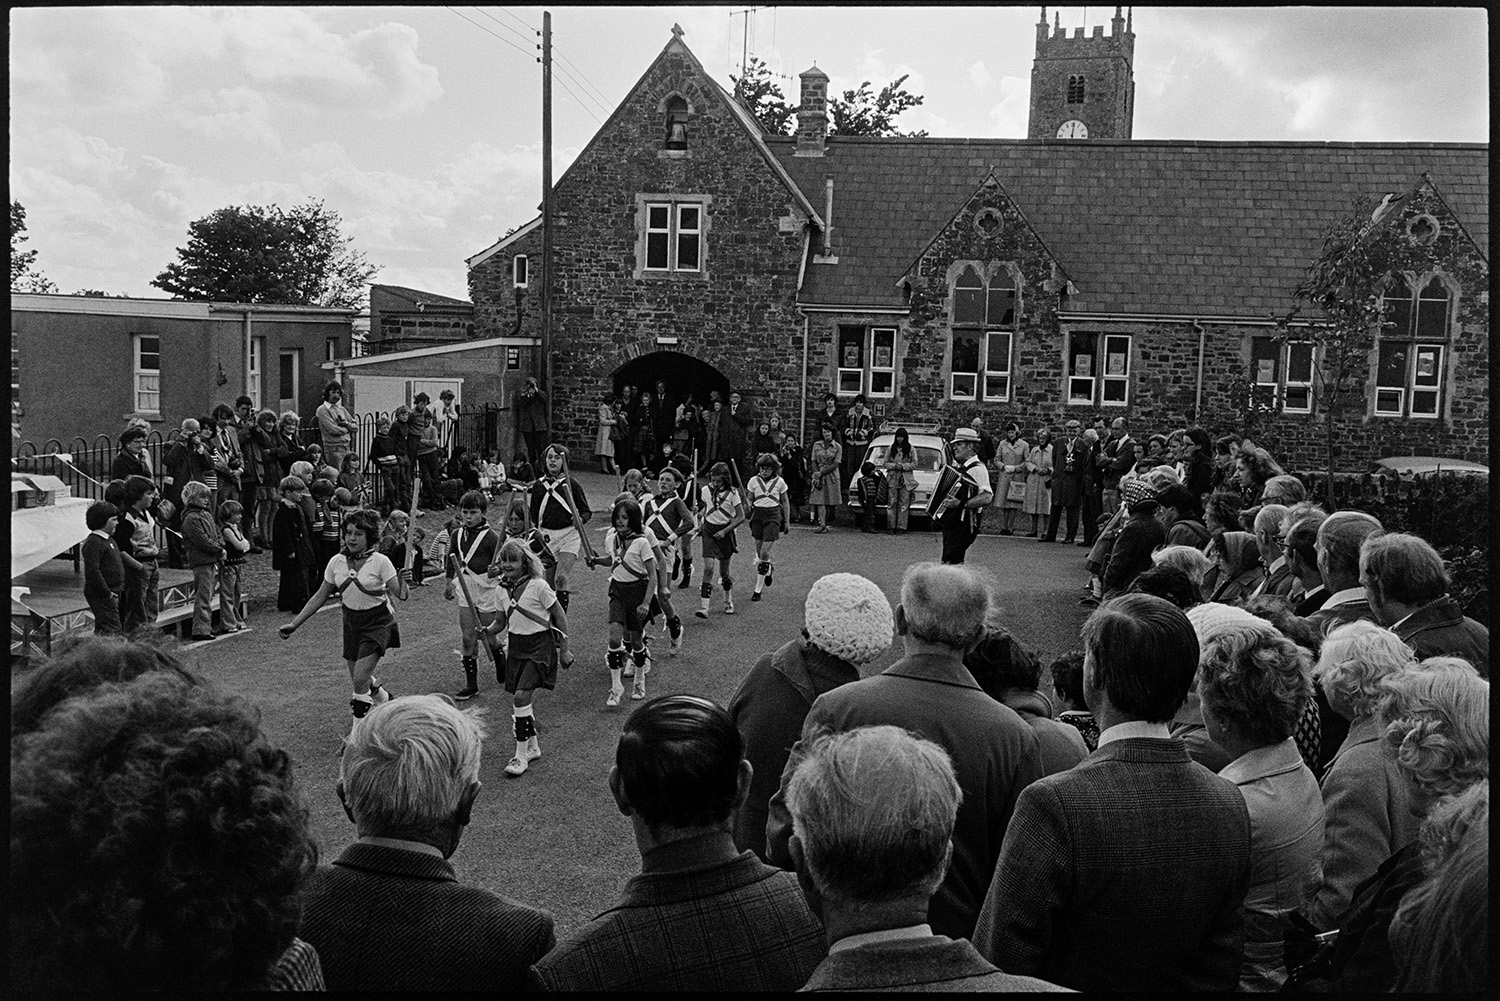 Children Morris dancing in village street. 
[Child Morris Dancers performing in front of a crowd outside High Bickington Primary School as part of the celebrations for the Silver Jubilee of Queen Elizabeth II. A man is playing the accordion for them.]